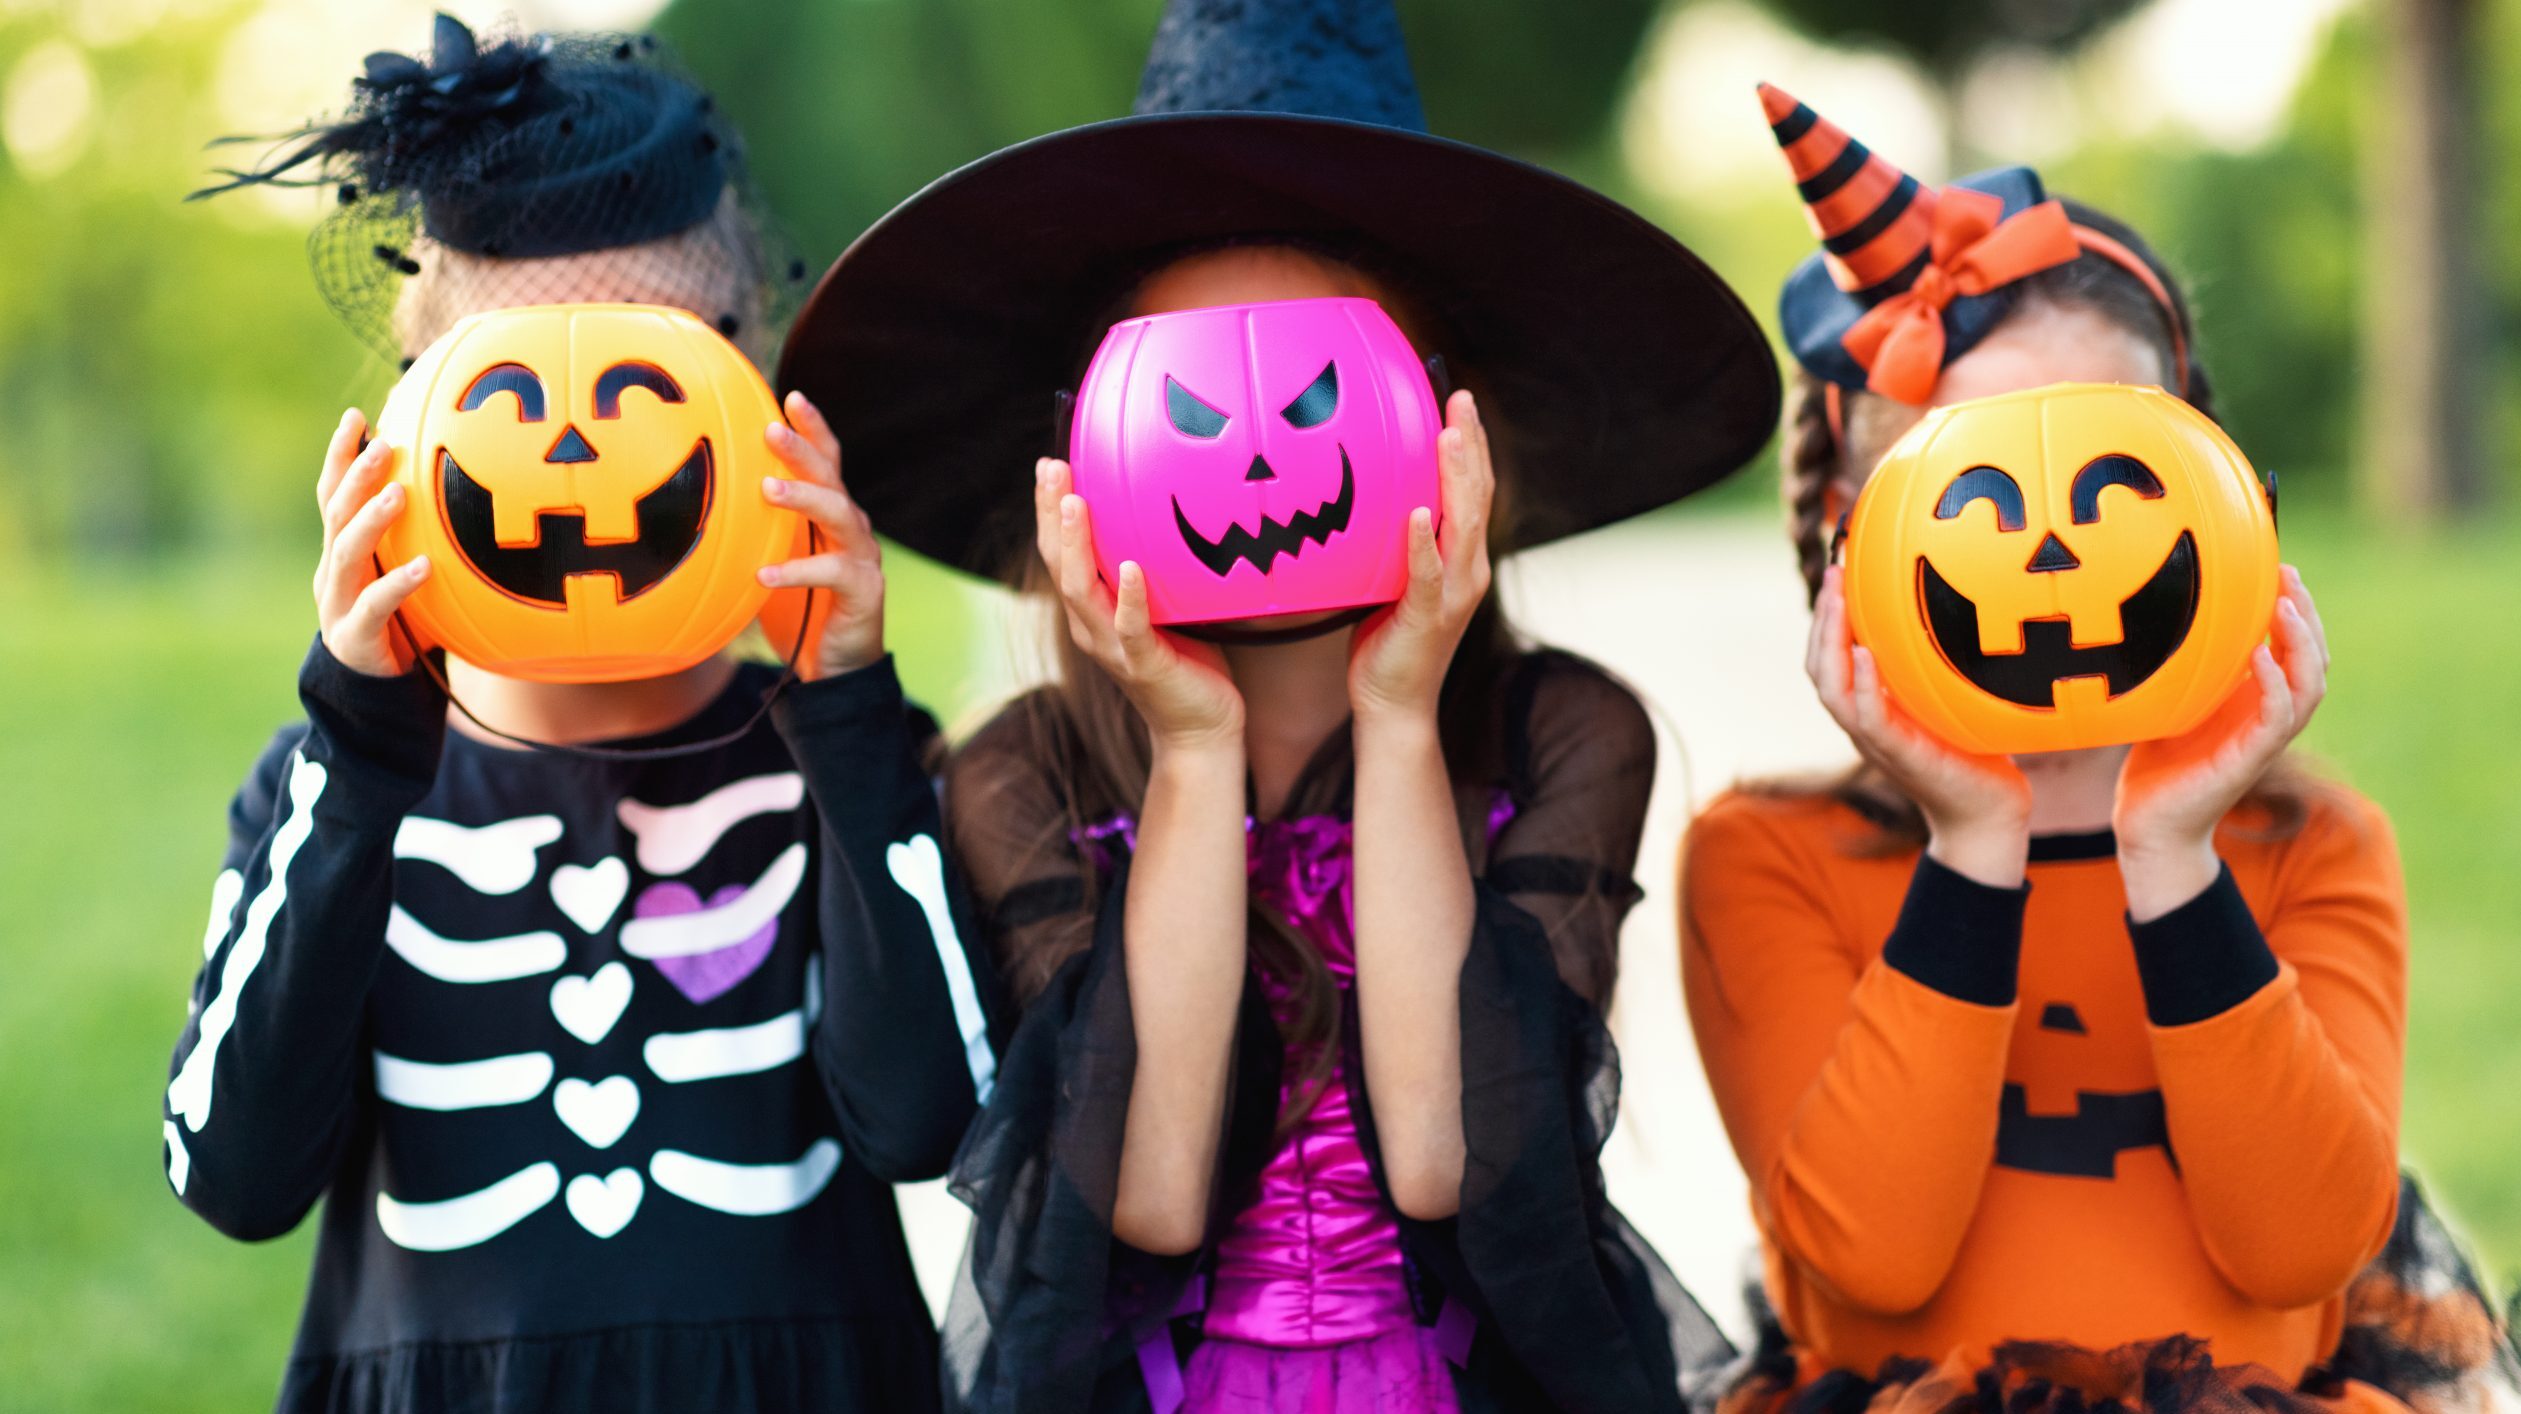 Kids in cute Halloween costumes hold candy buckets